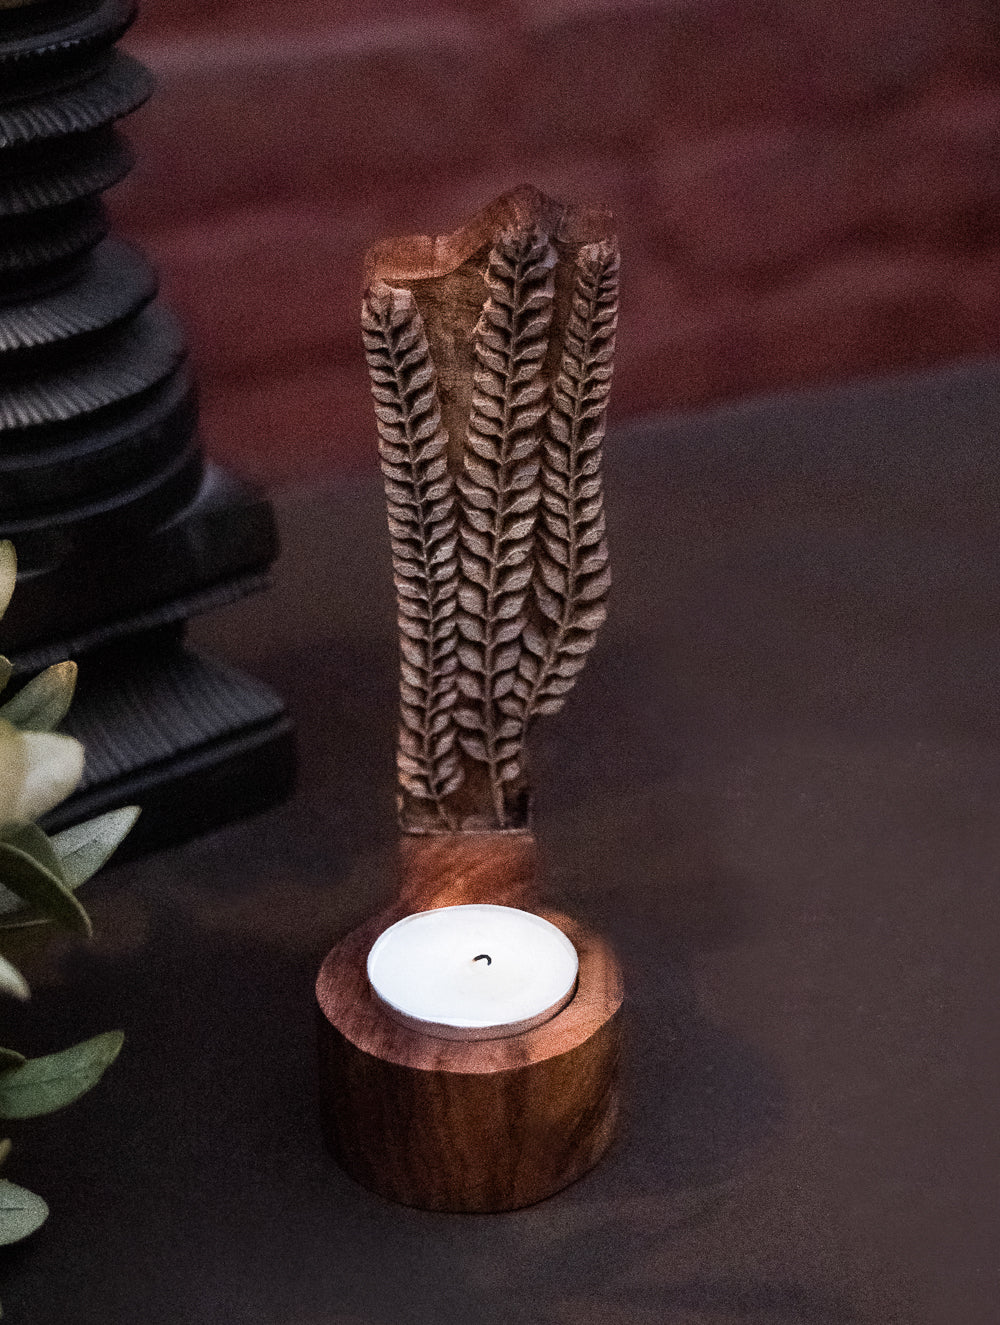 Load image into Gallery viewer, Nazakat. Exclusive, Fine Hand Engraved Wood Block Tealight Holder - Vines